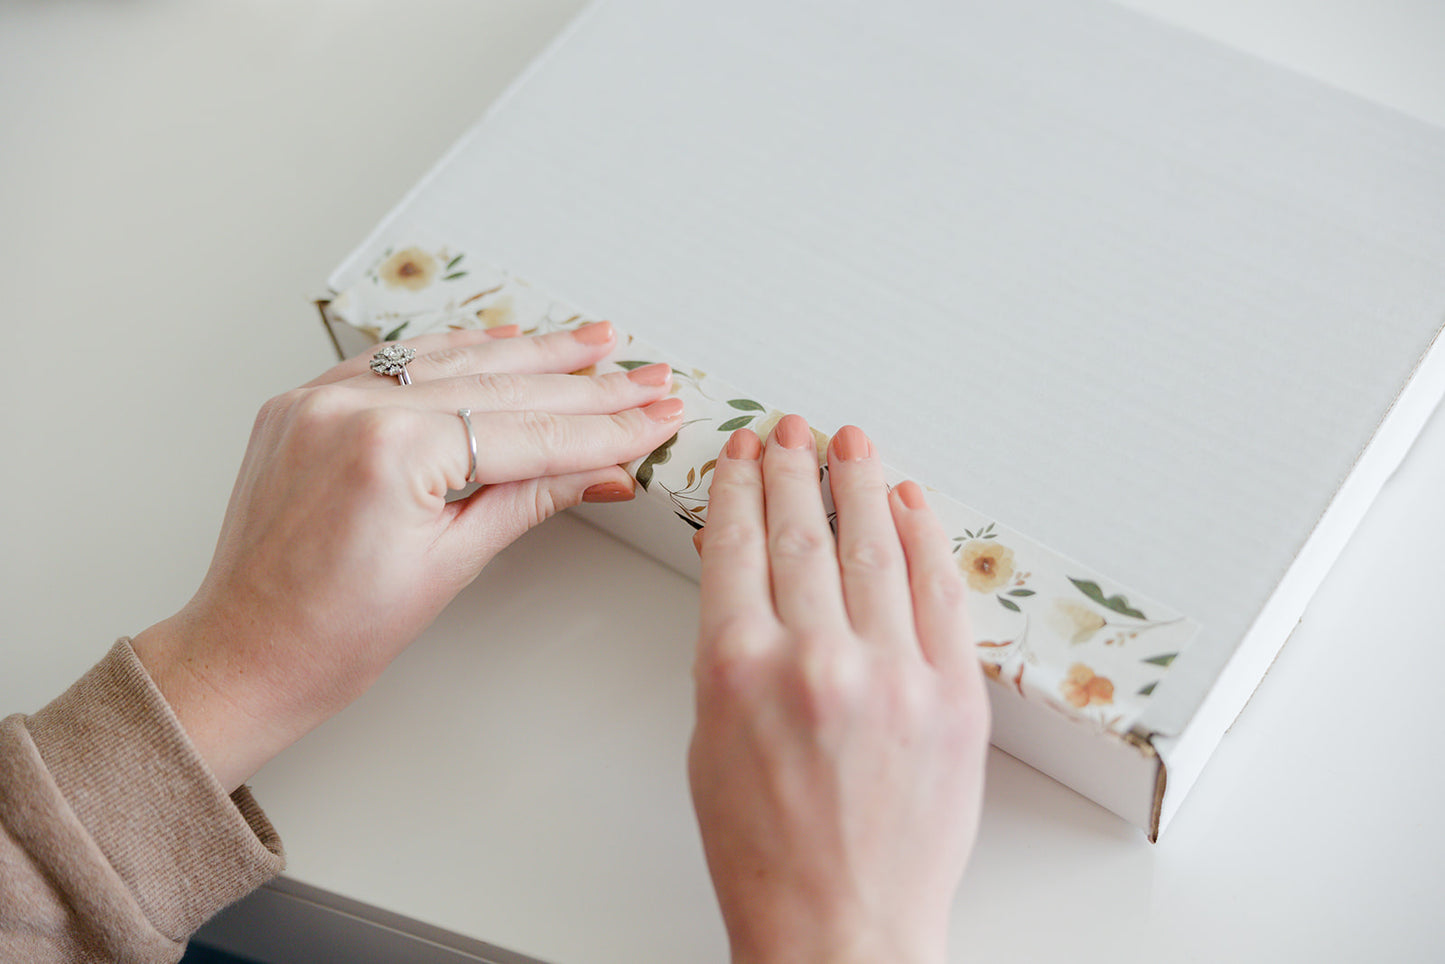 A woman is opening a white box with flowers and packing tape - Camelia Bloom - Canada Stock, from impack.co on it.